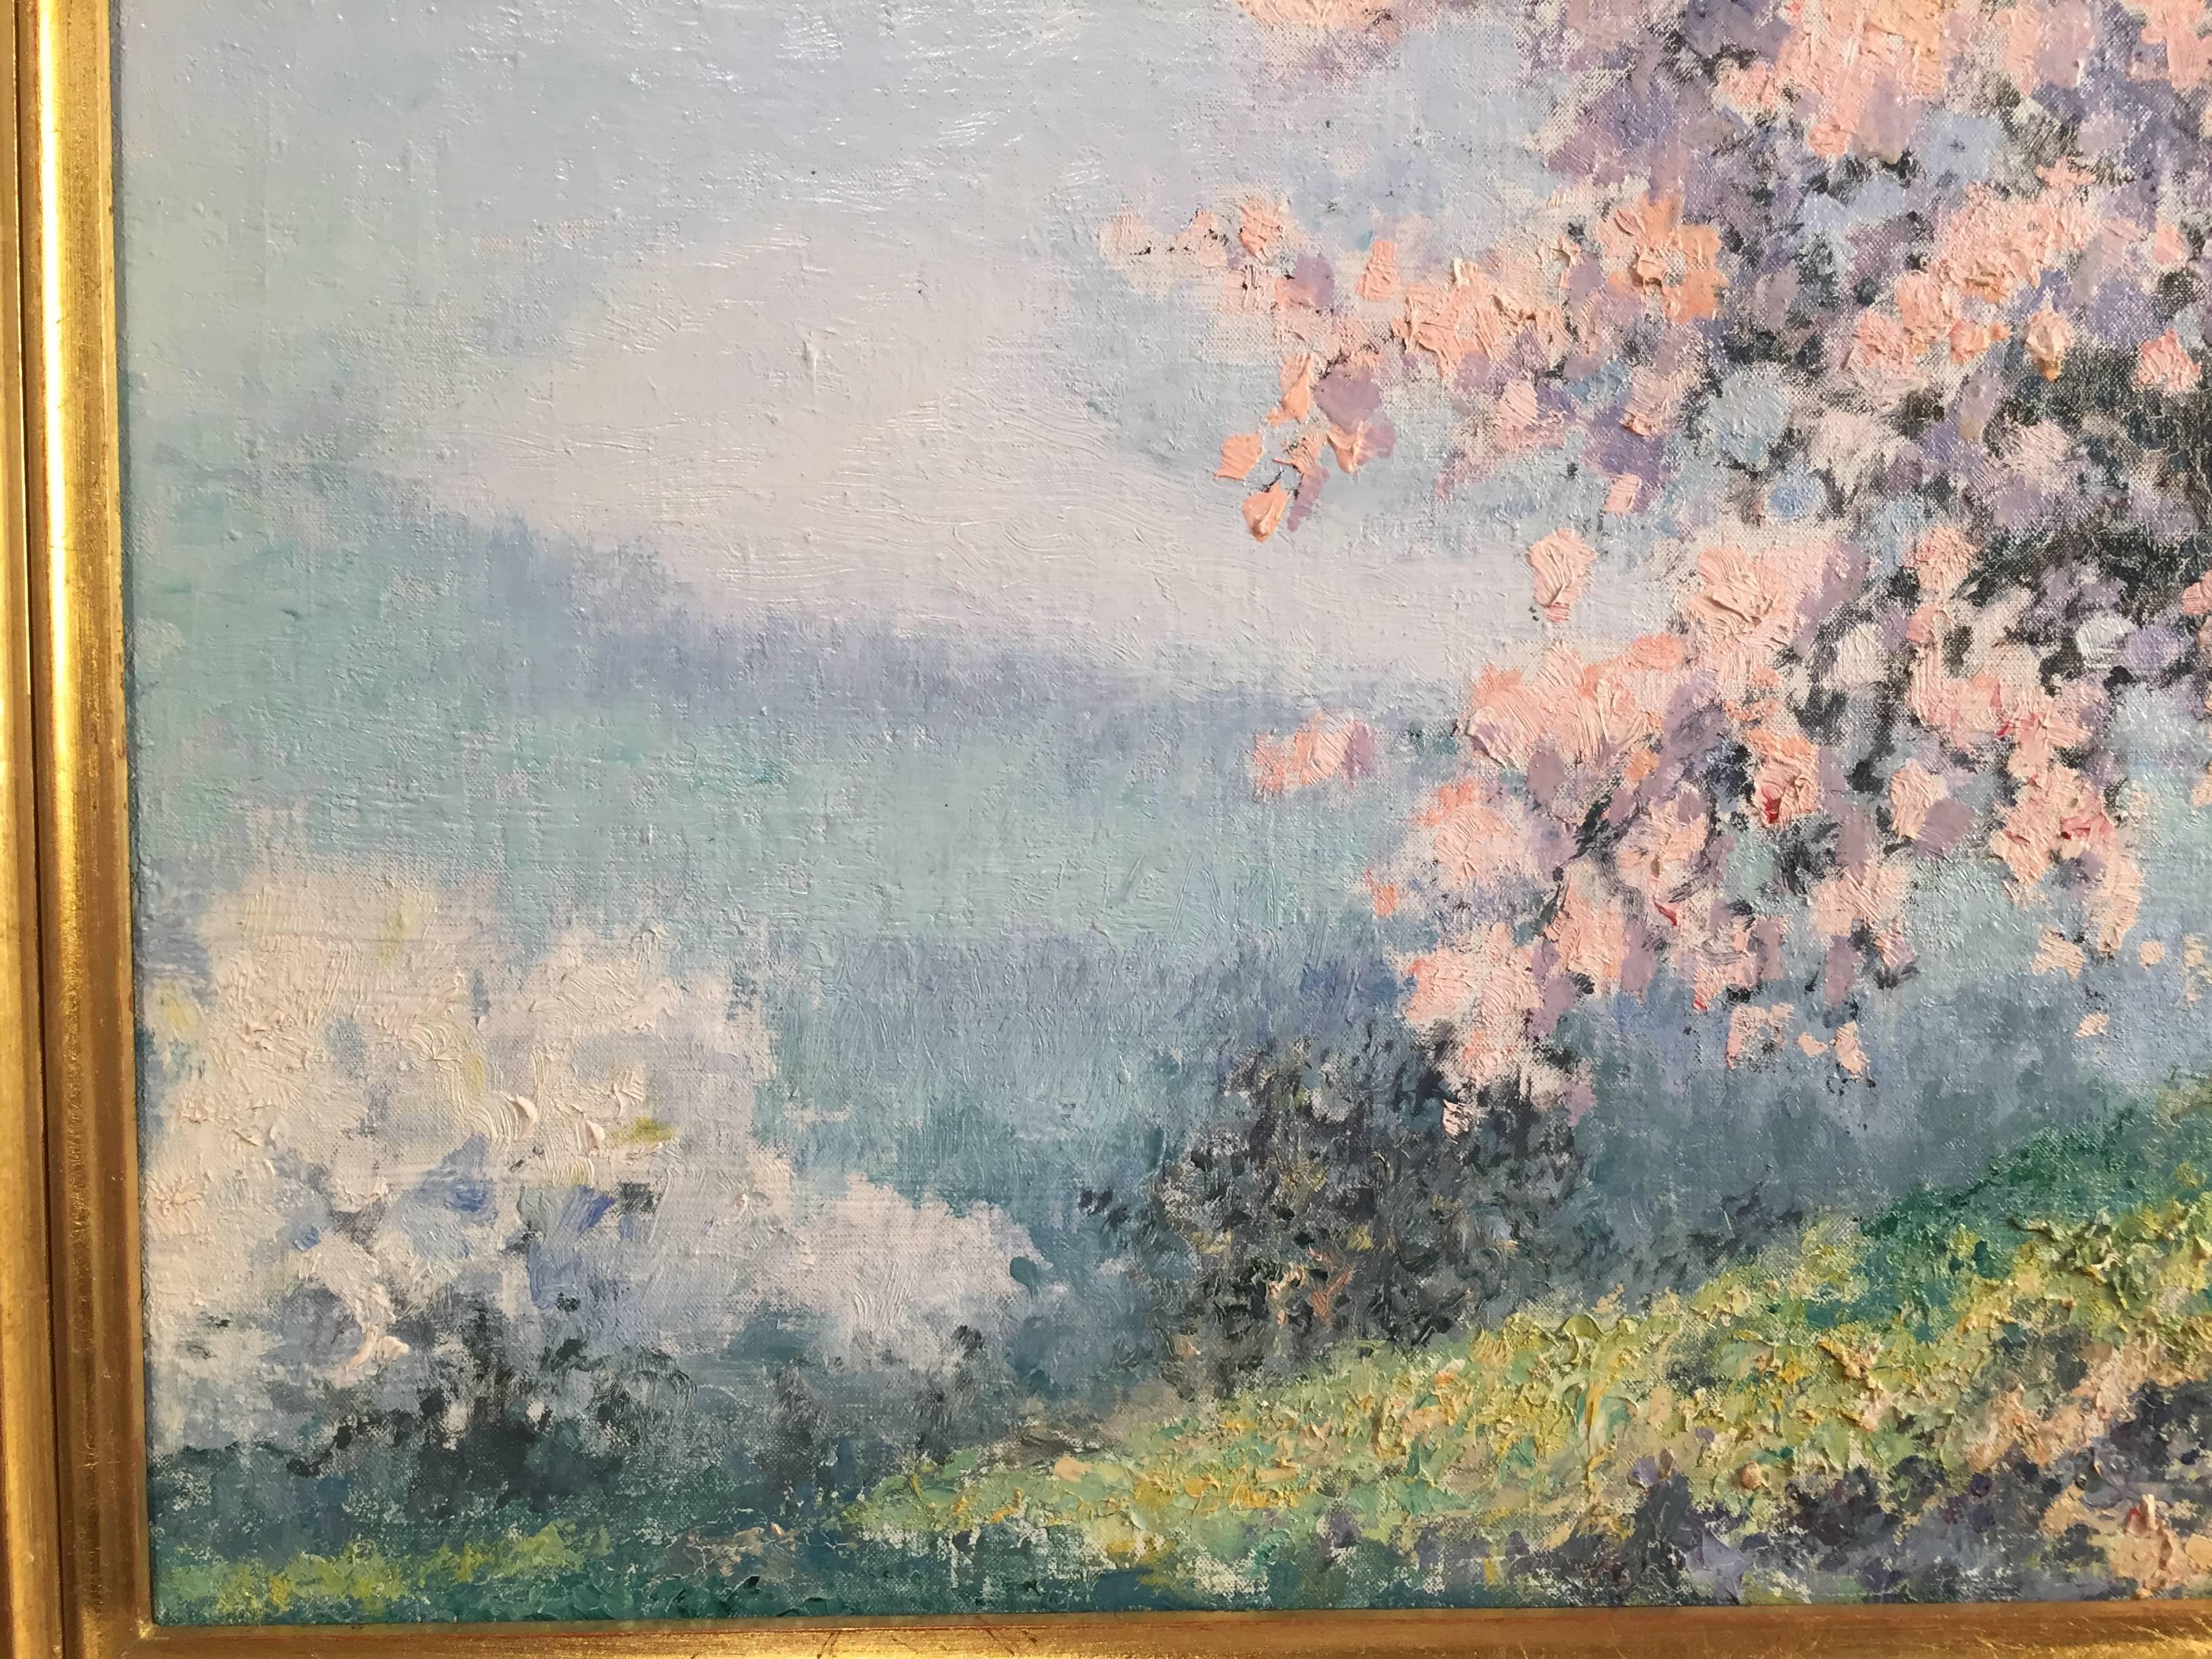 oil on canvas
20 x 26 inches
28 x 35 inches framed
22K gilded new custom frame
French Impressionist oil of a springtime landscape in tranquil jewel tones of pinks and greens. Flowering trees in the foreground with  a town in  the distance.
Son of an